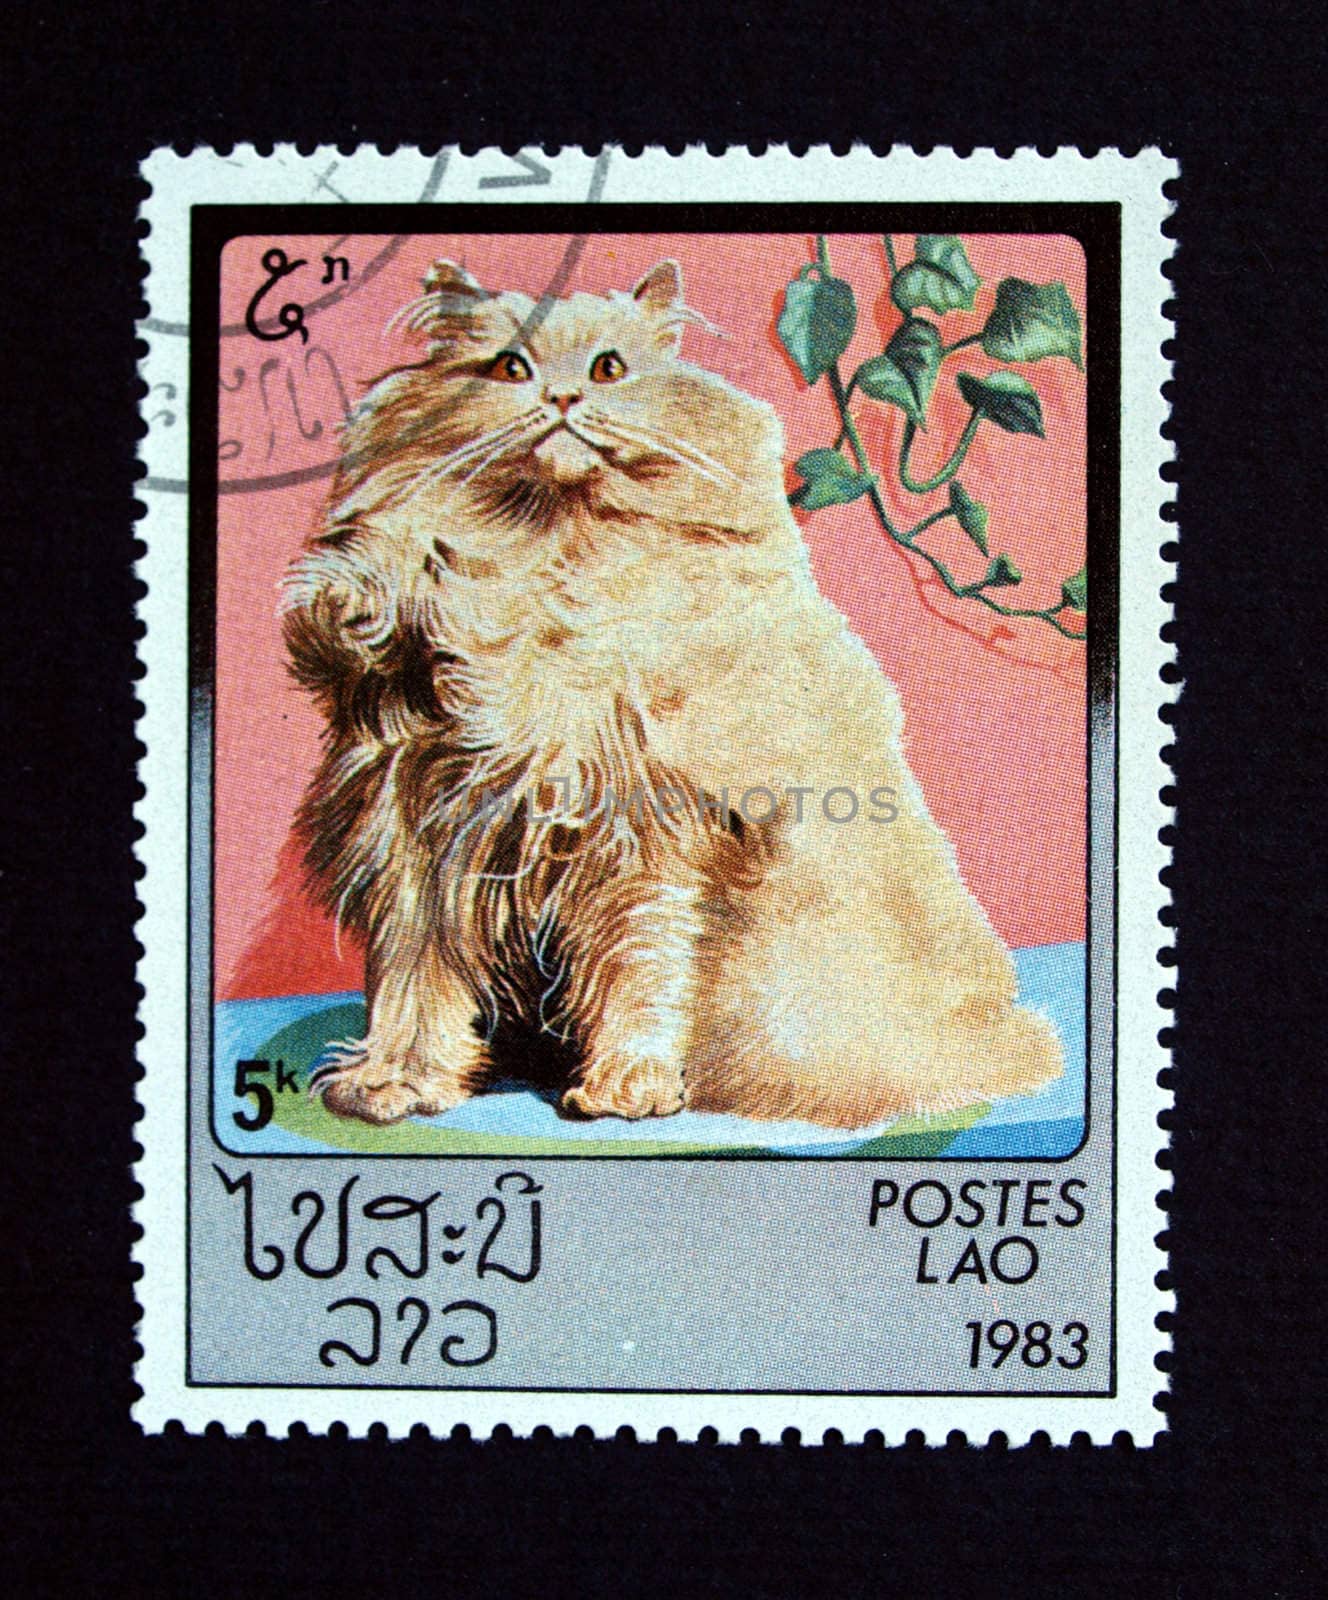 Lao postage stamp with cats